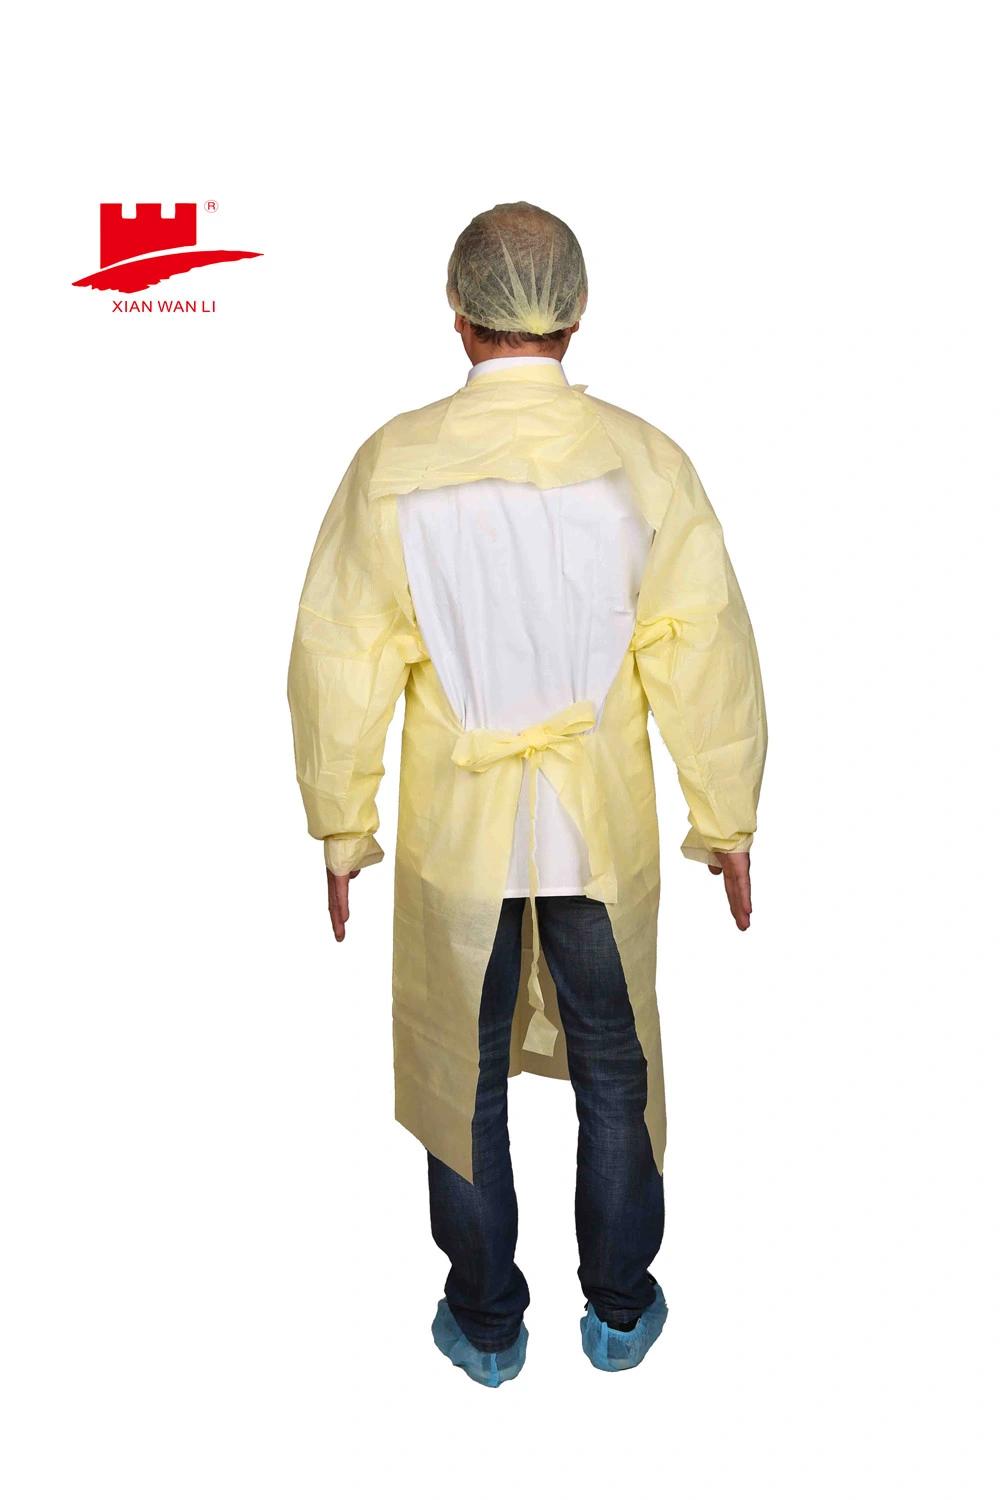 Over-The-Head Reinforced Convenient Gown Examination Gown